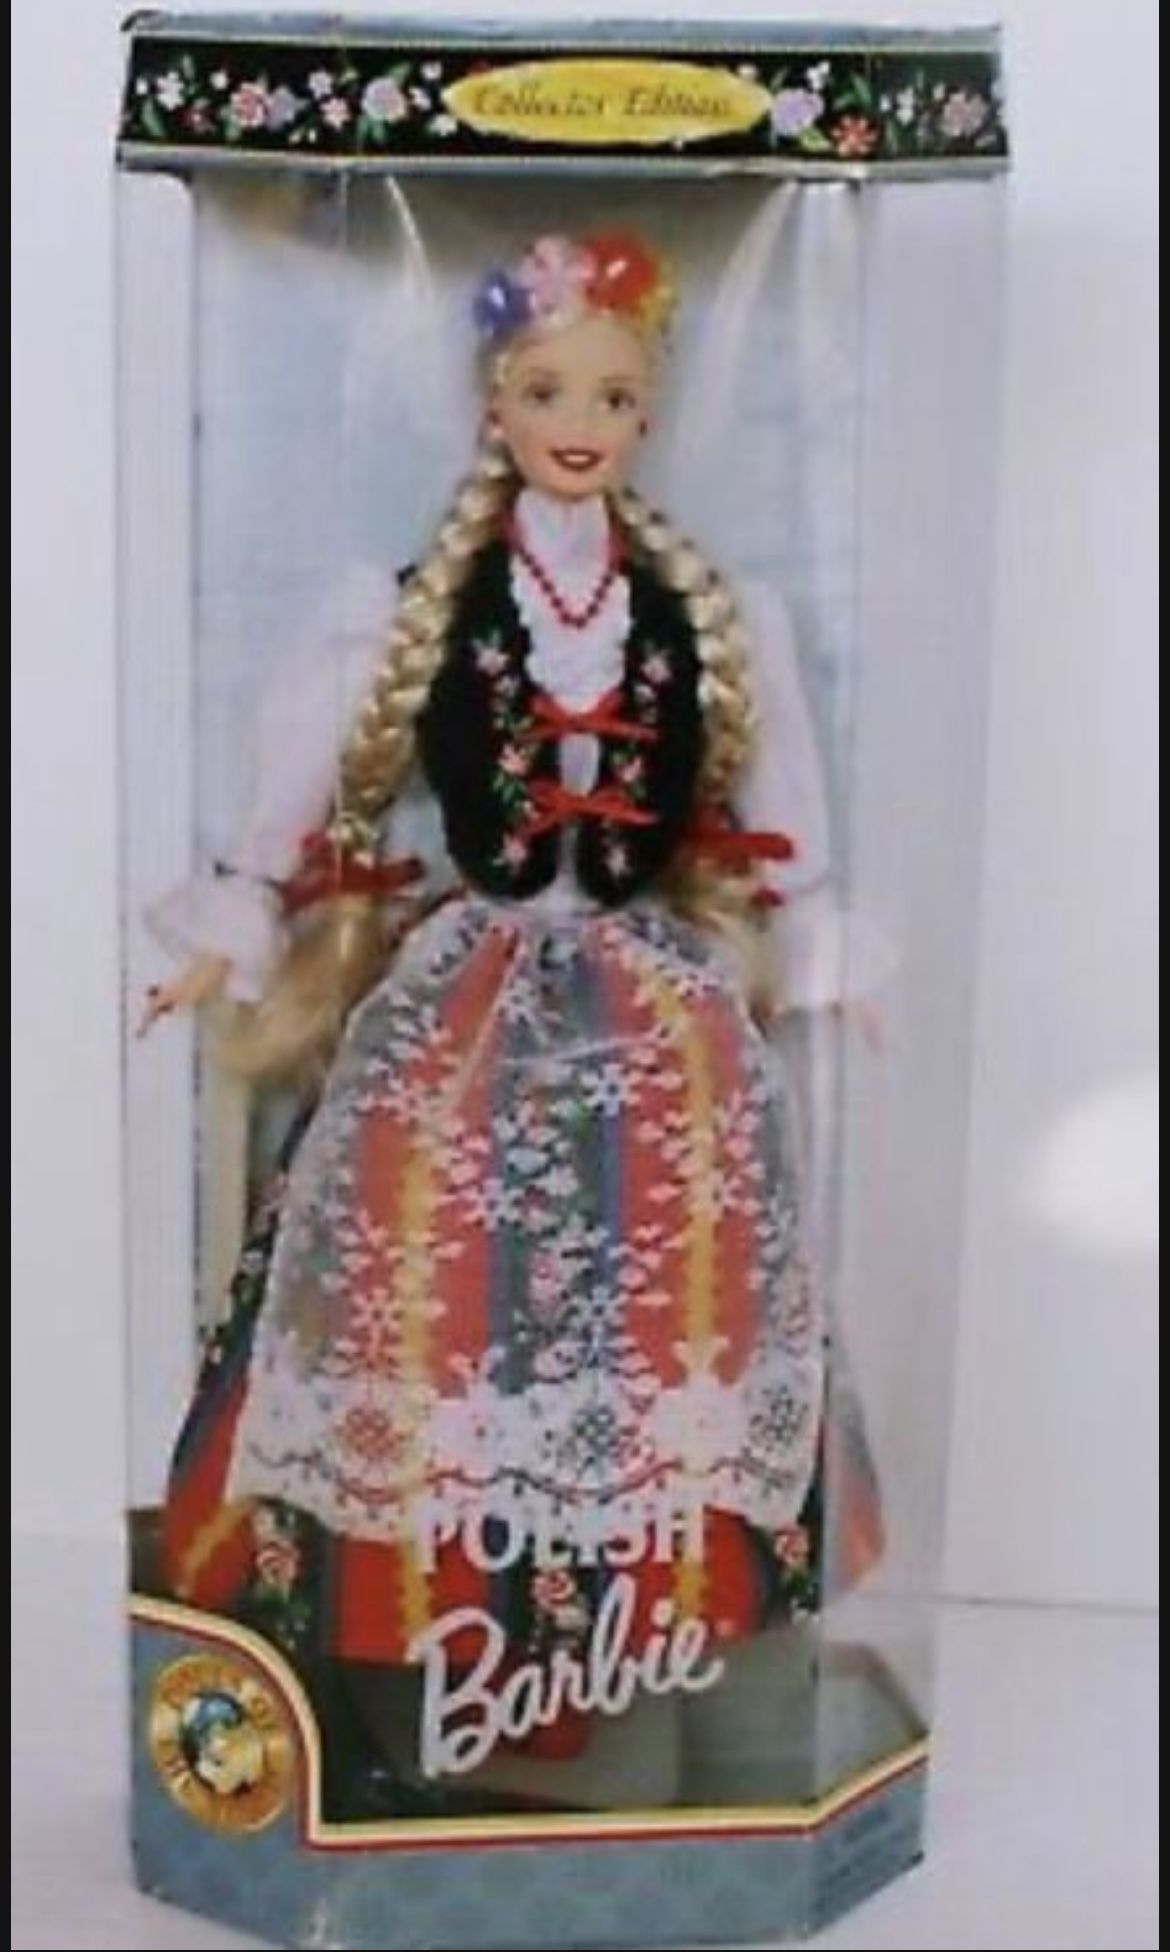 Polish Barbie Dolls of the World Europe Collector Edition 1997 Mattel